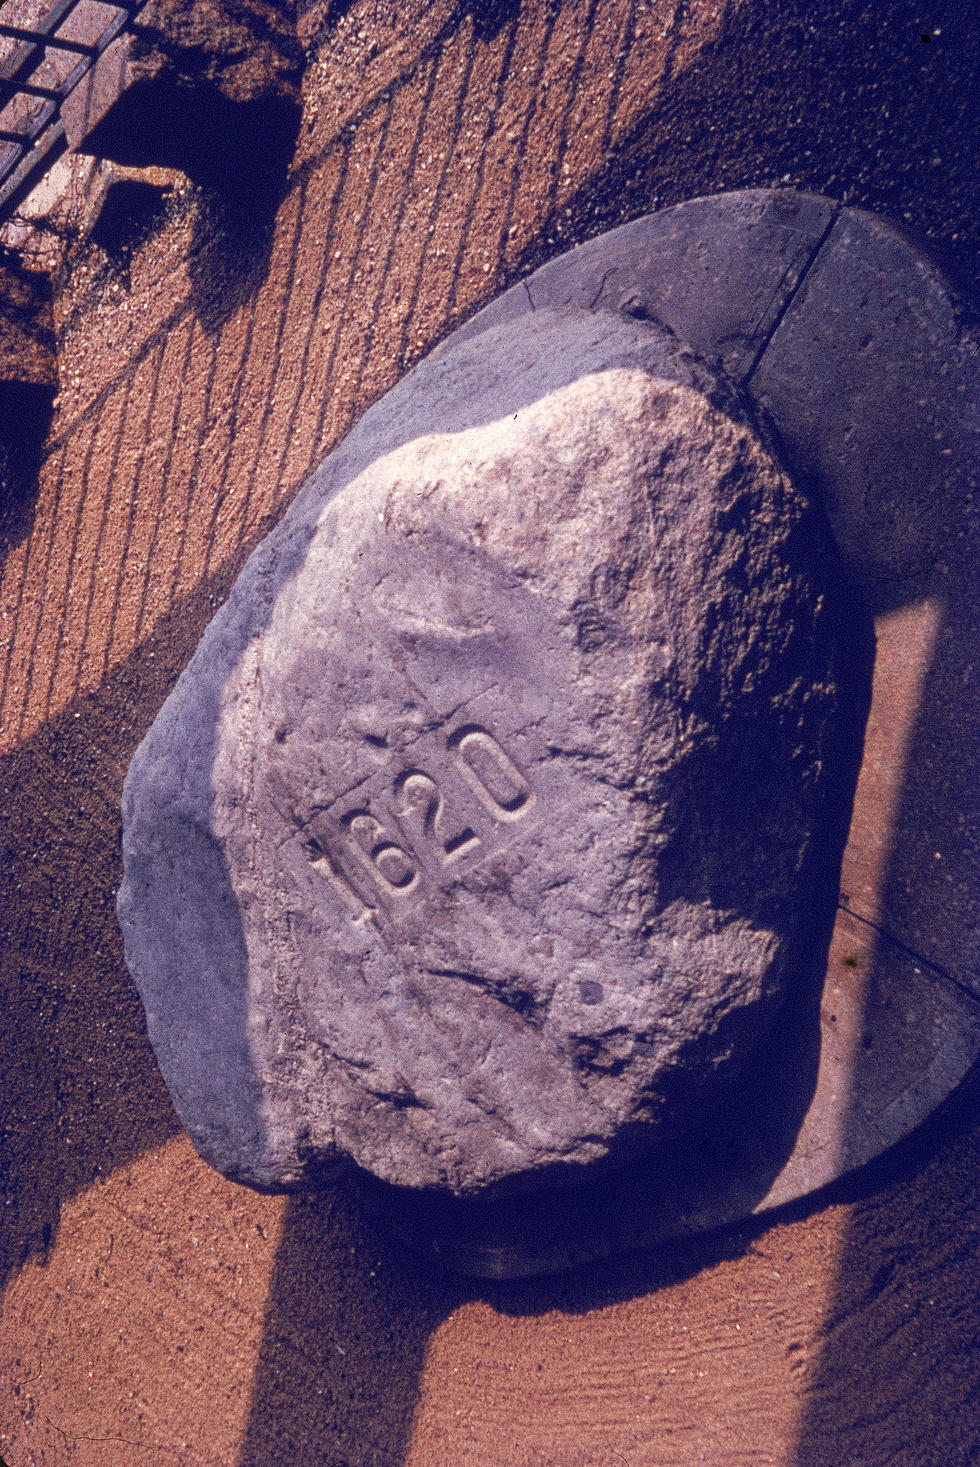 Plymouth Rock Vandalized